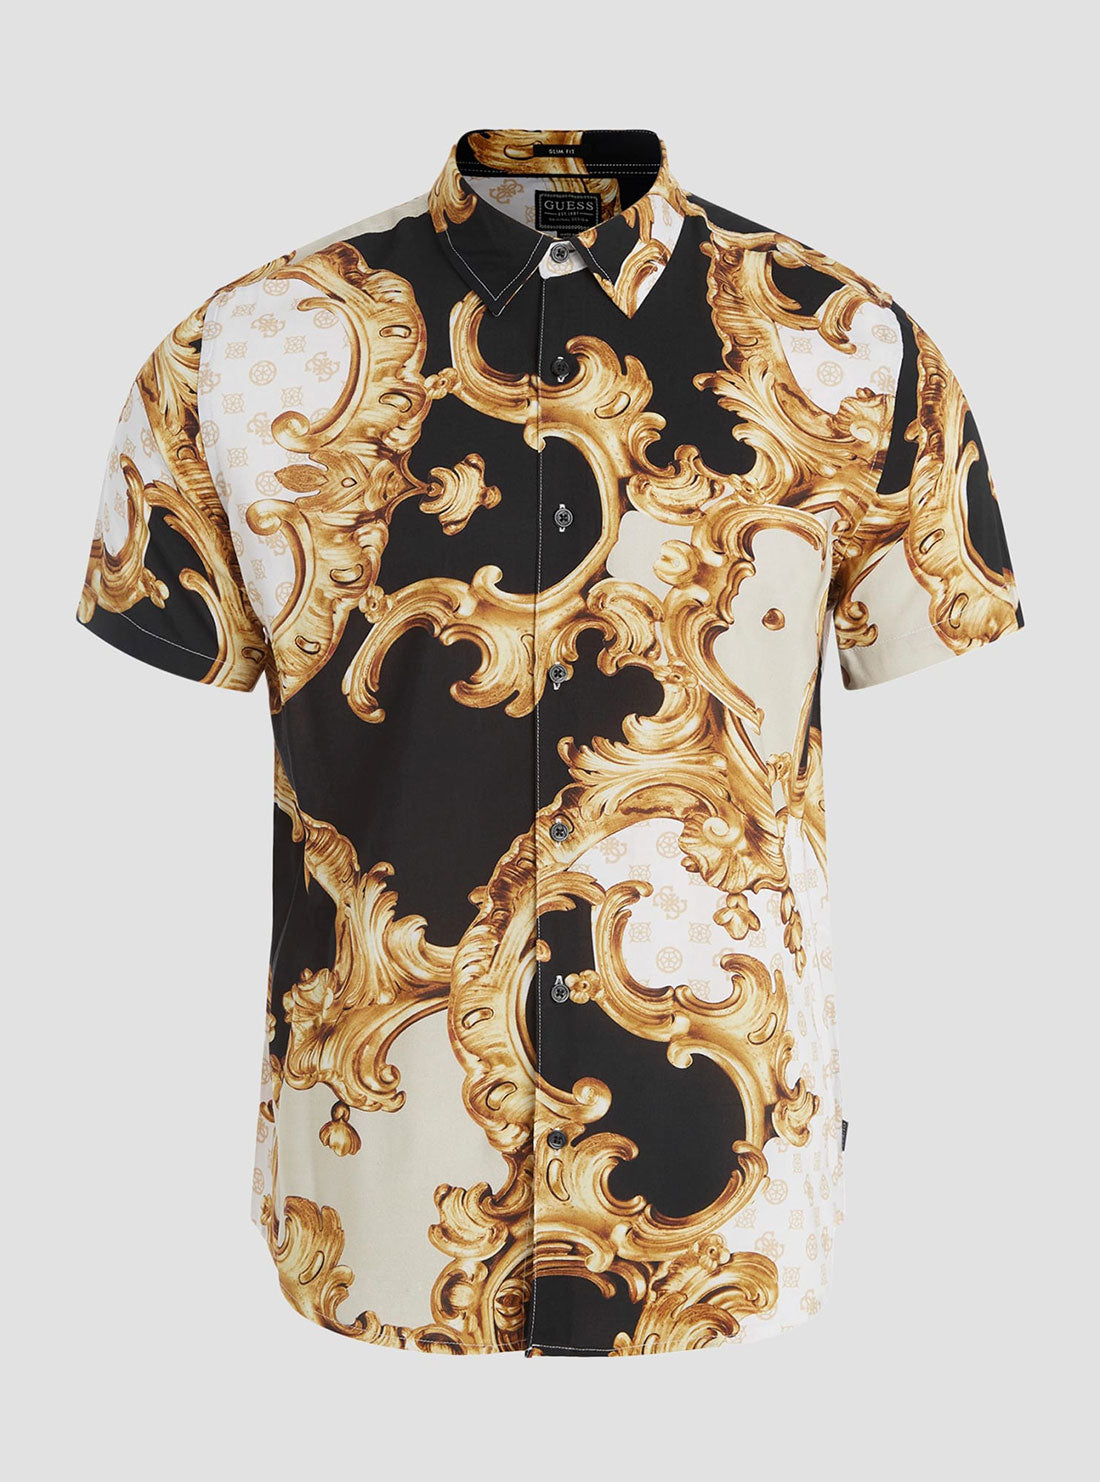 GUESS Men's Eco Gold Peony Print Rayon Shirt M3RH62WD4Z2 Ghost View